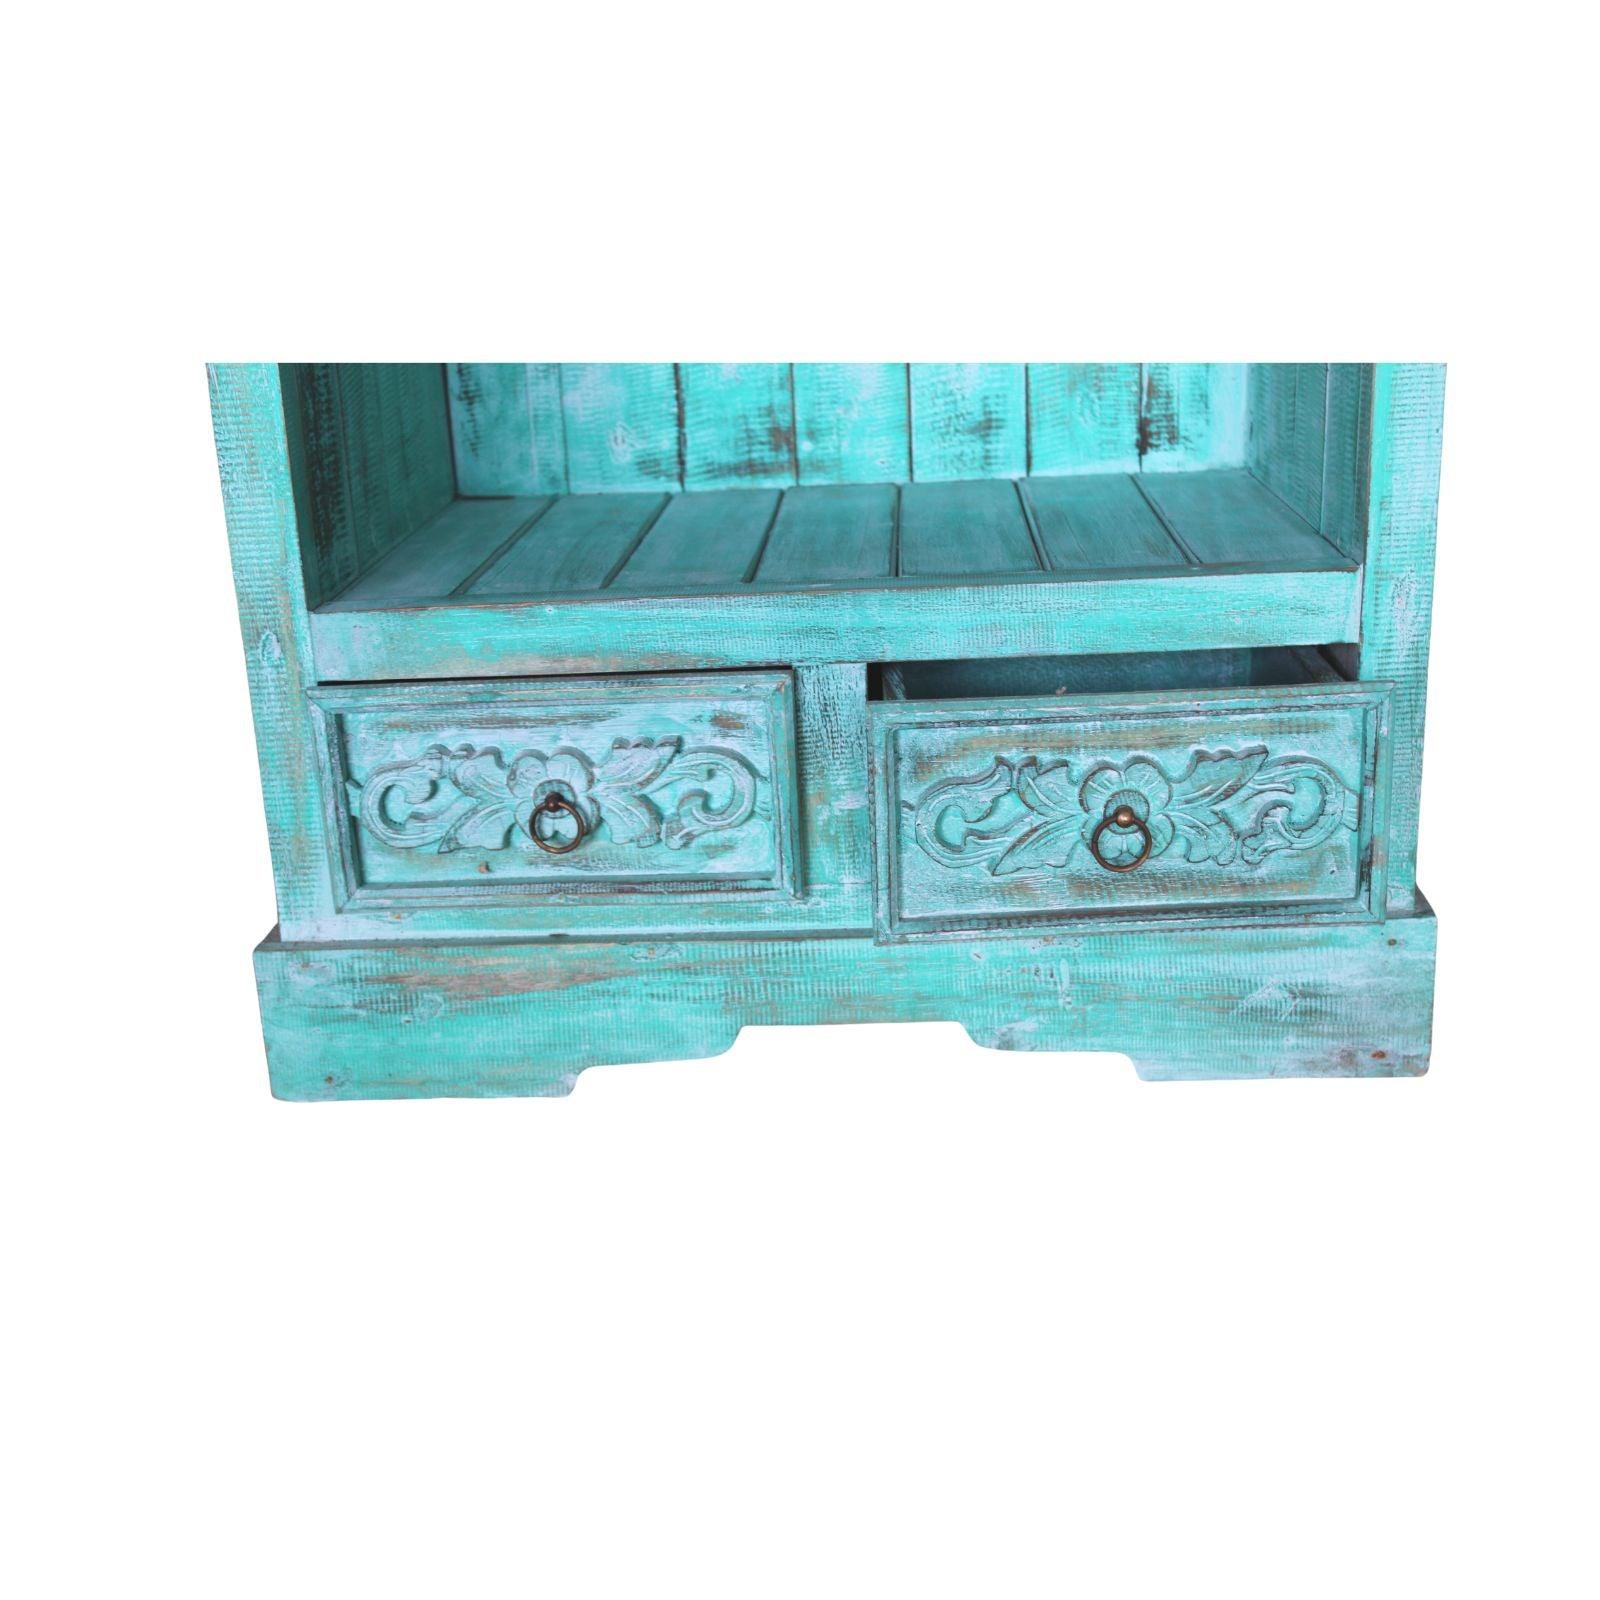 Freestanding Bathroom Cabinet - Turquoise Wash - Charming Spaces